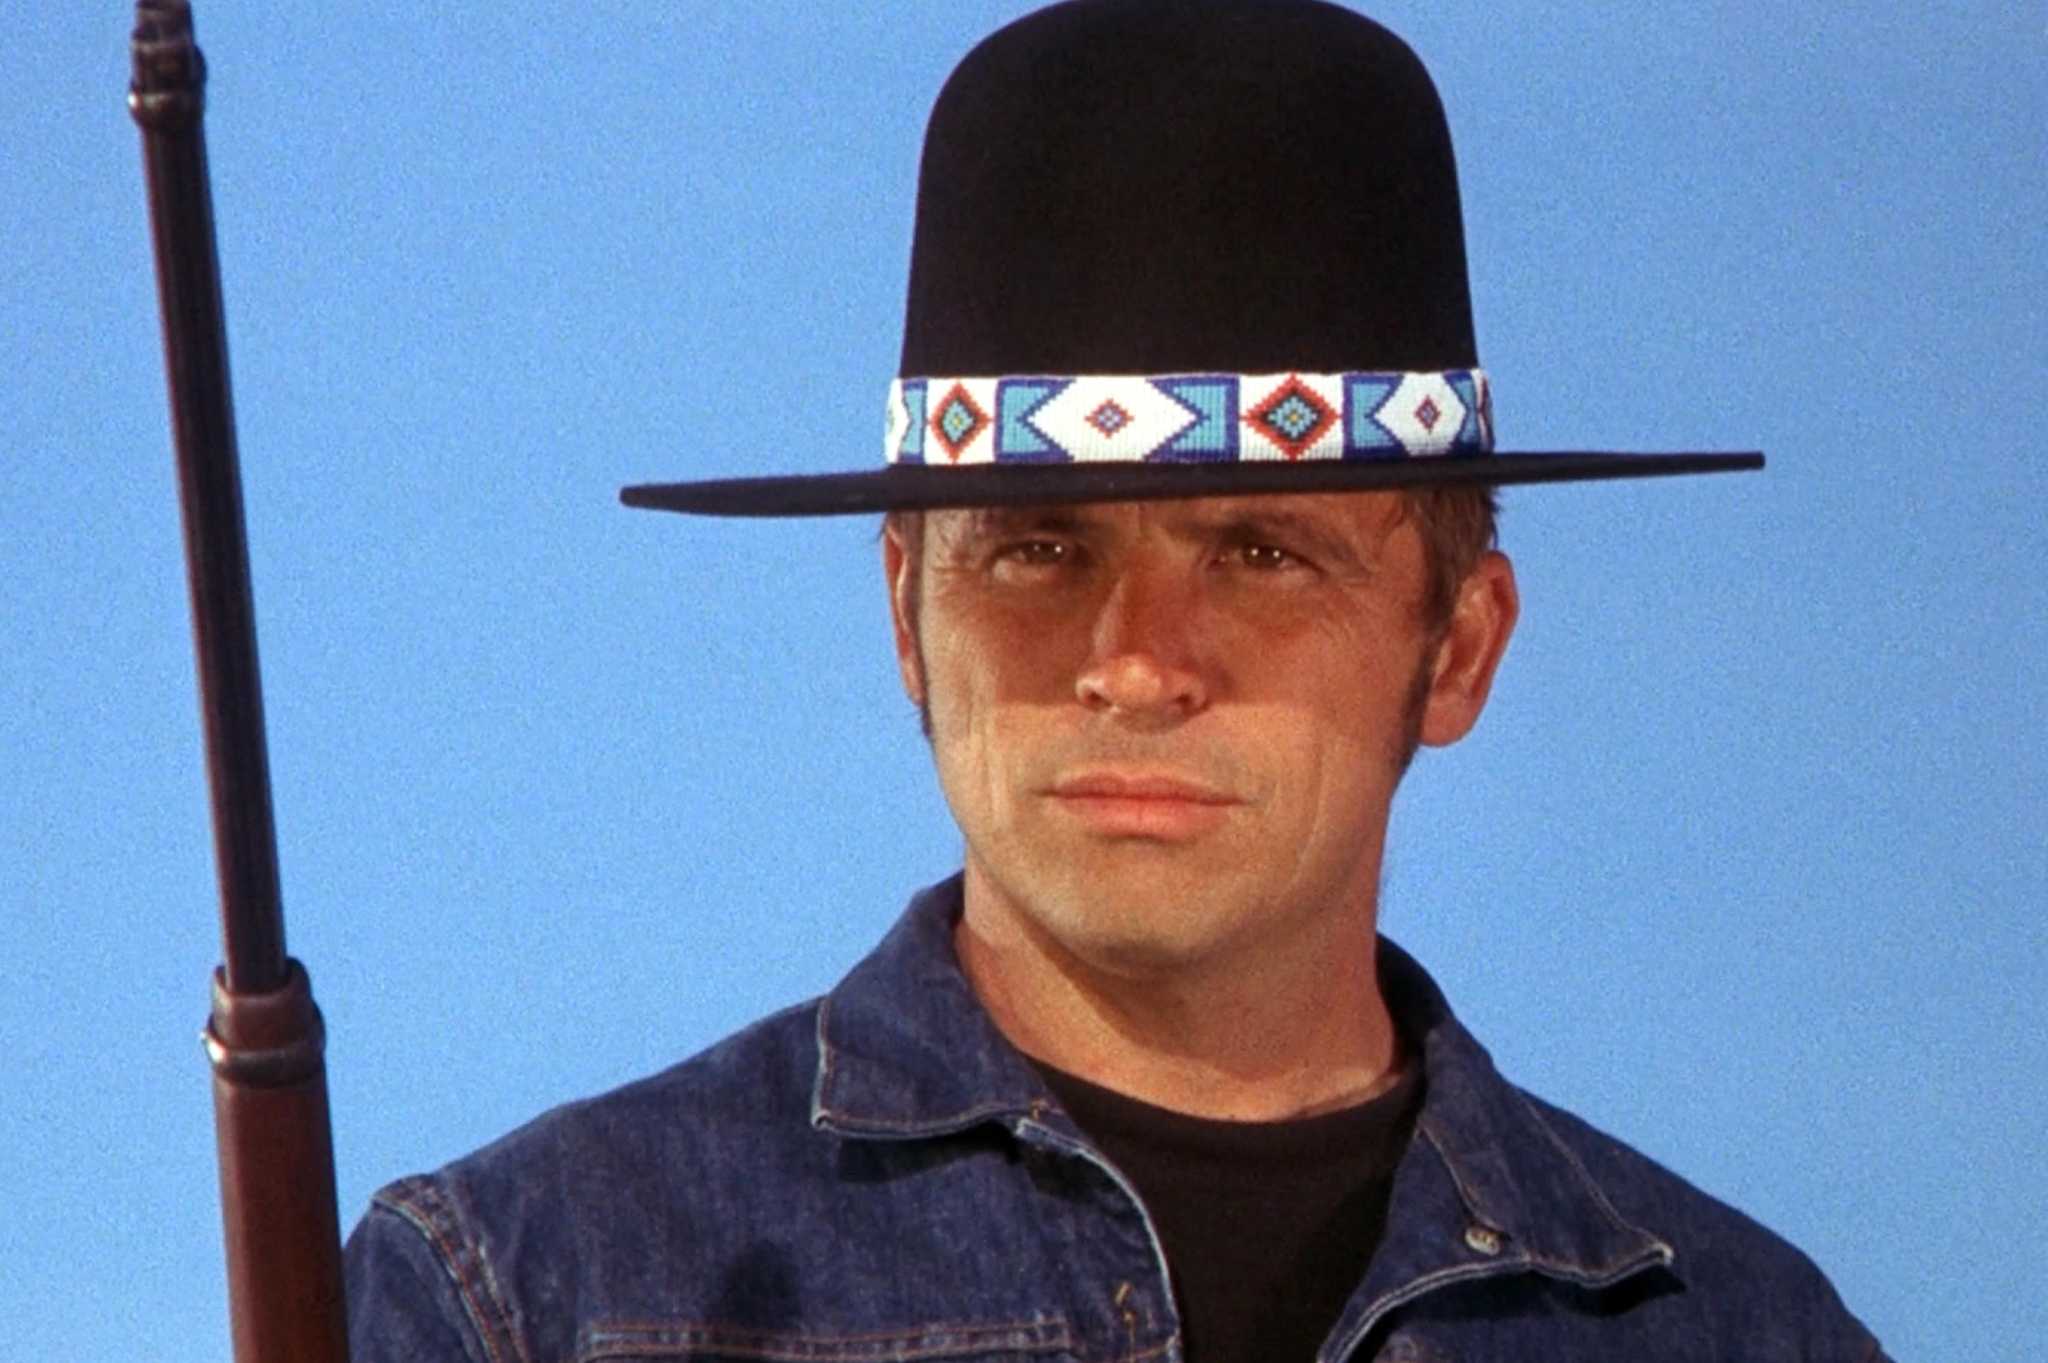 Billy Jack goes berserk again in new collection.